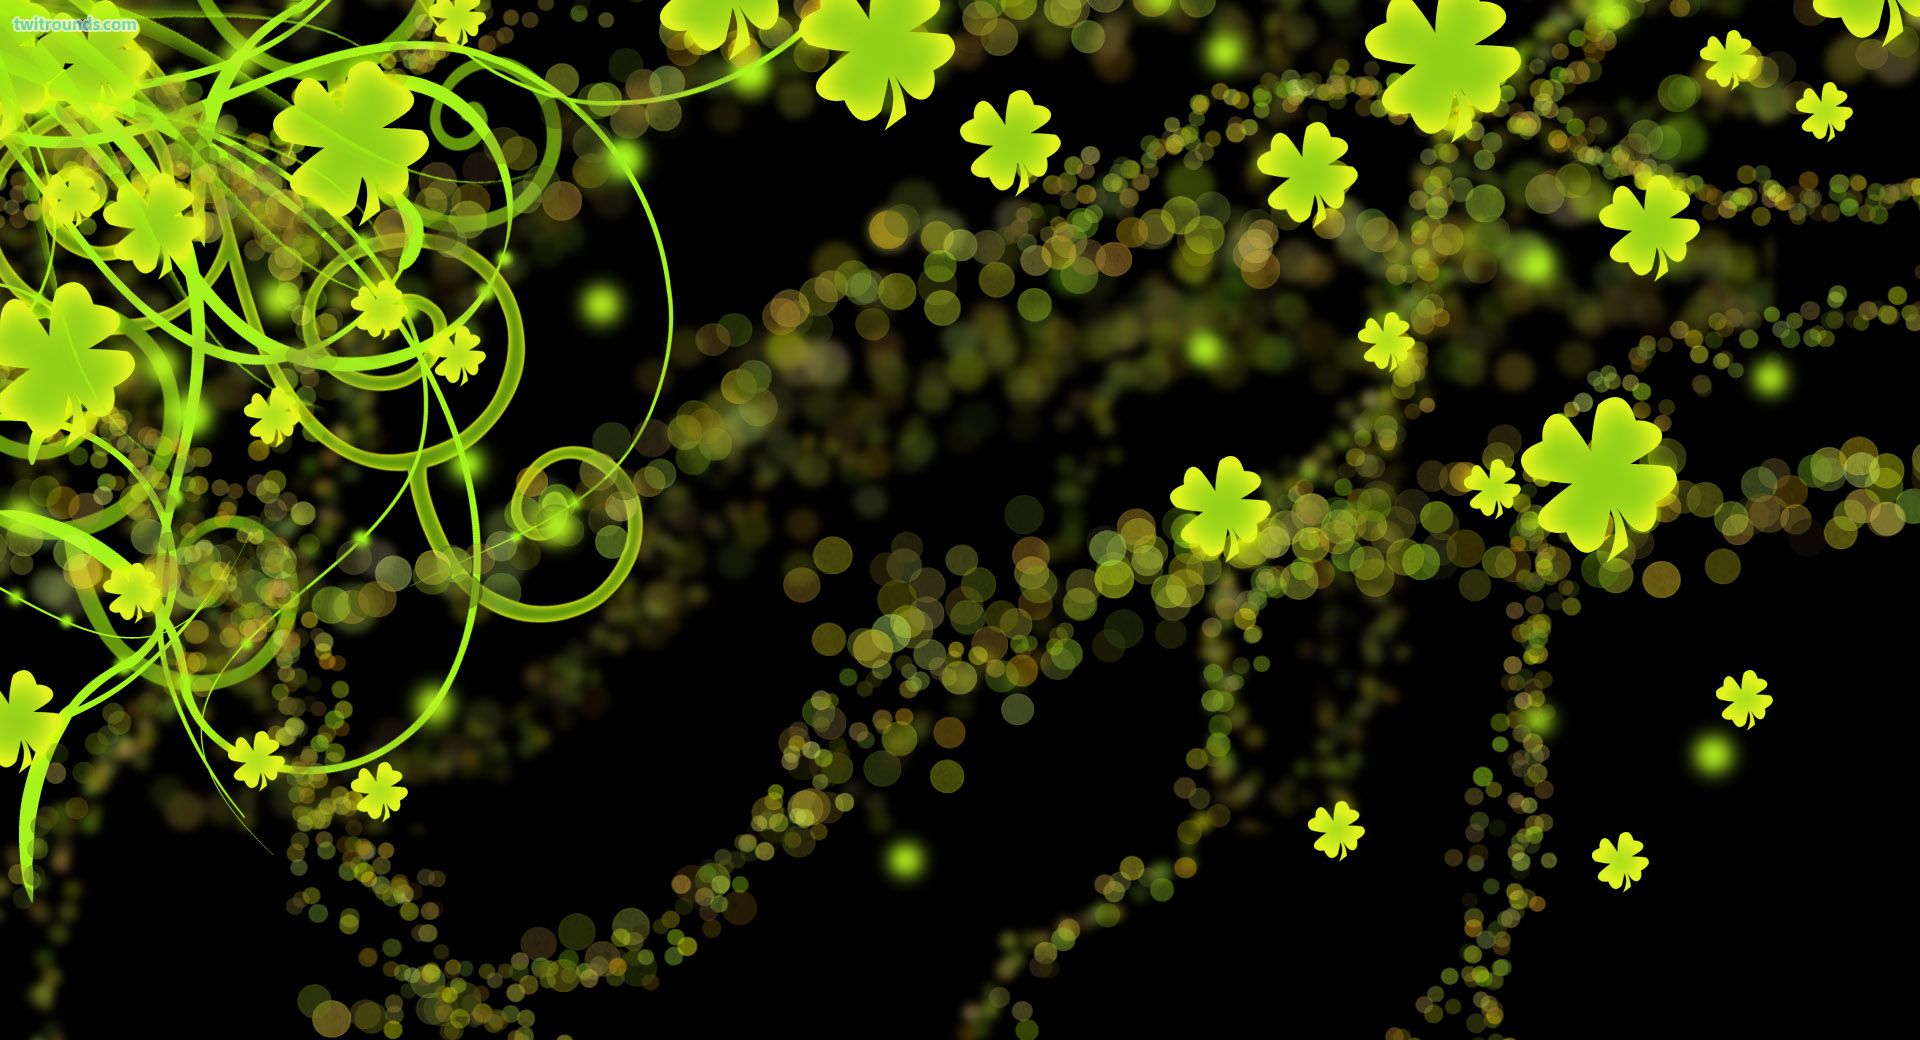 Happy Saint Patrick's Day Wallpaper, High Definition, High Quality, Widescreen